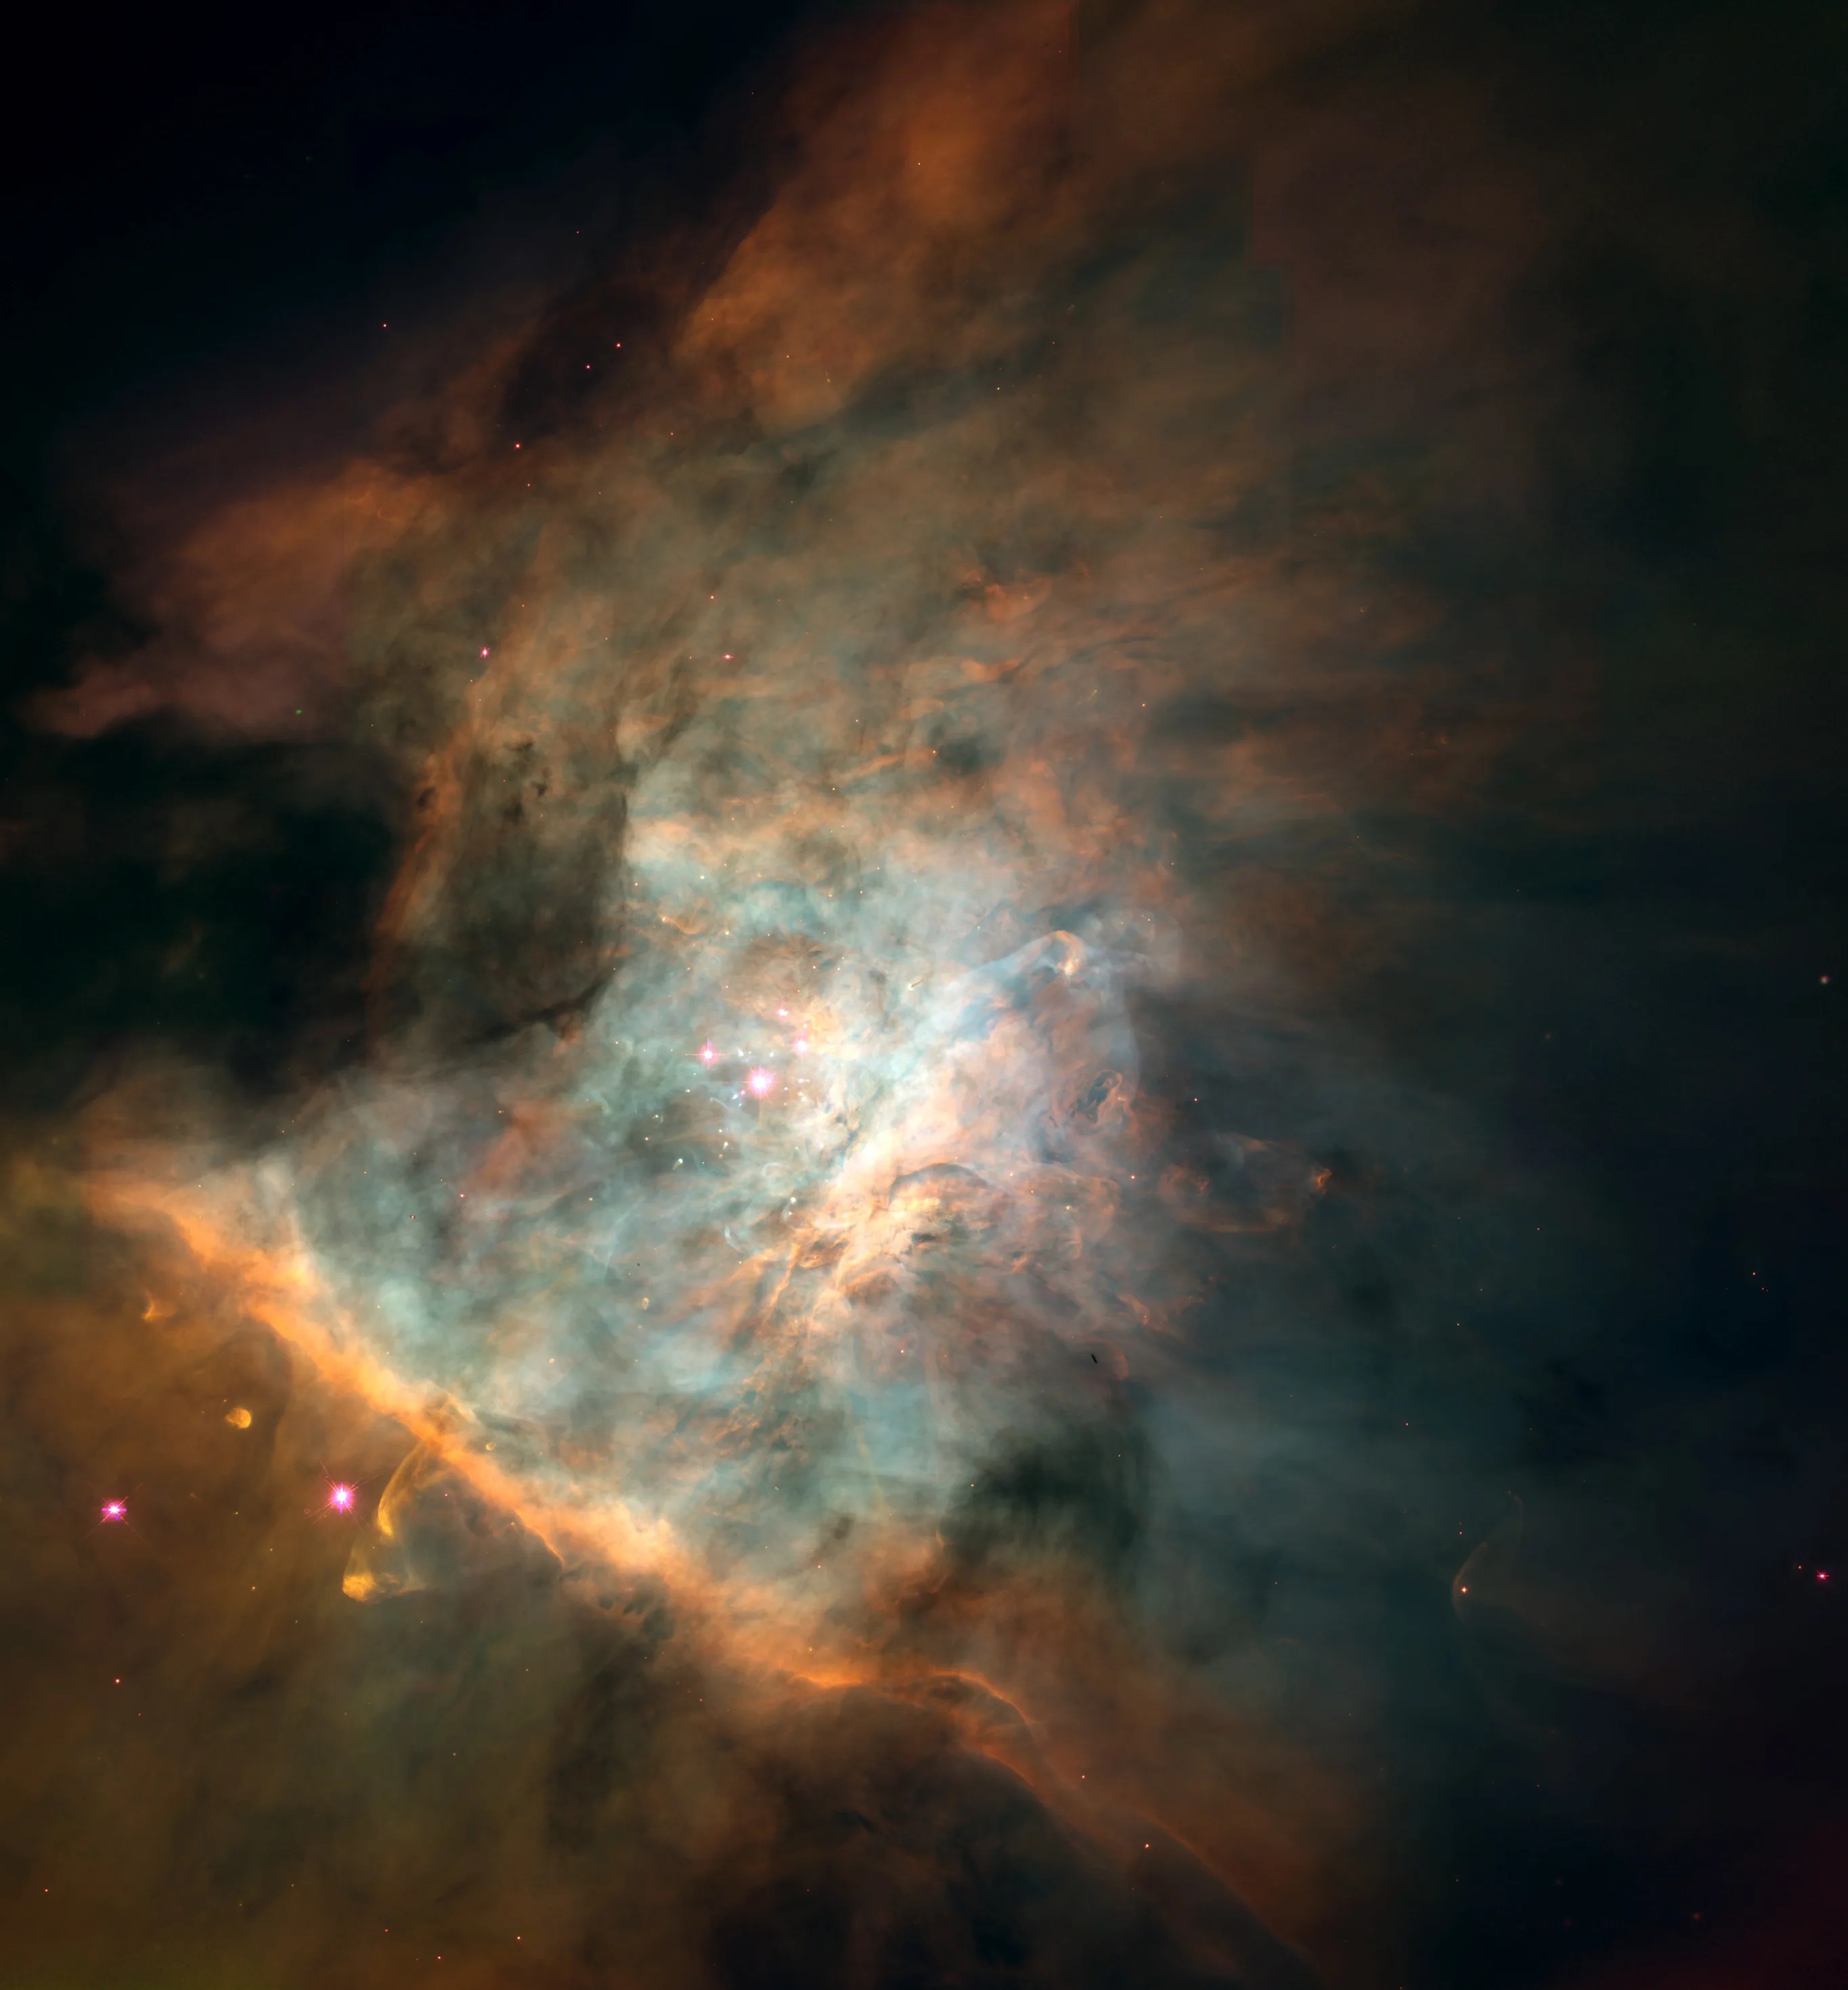 This region of the Orion Nebula is seen as a colorful, bright region of gas and dust, mostly in shades of green, yellow, orange and brown. It's brightest toward the center and darkens at the image edges.